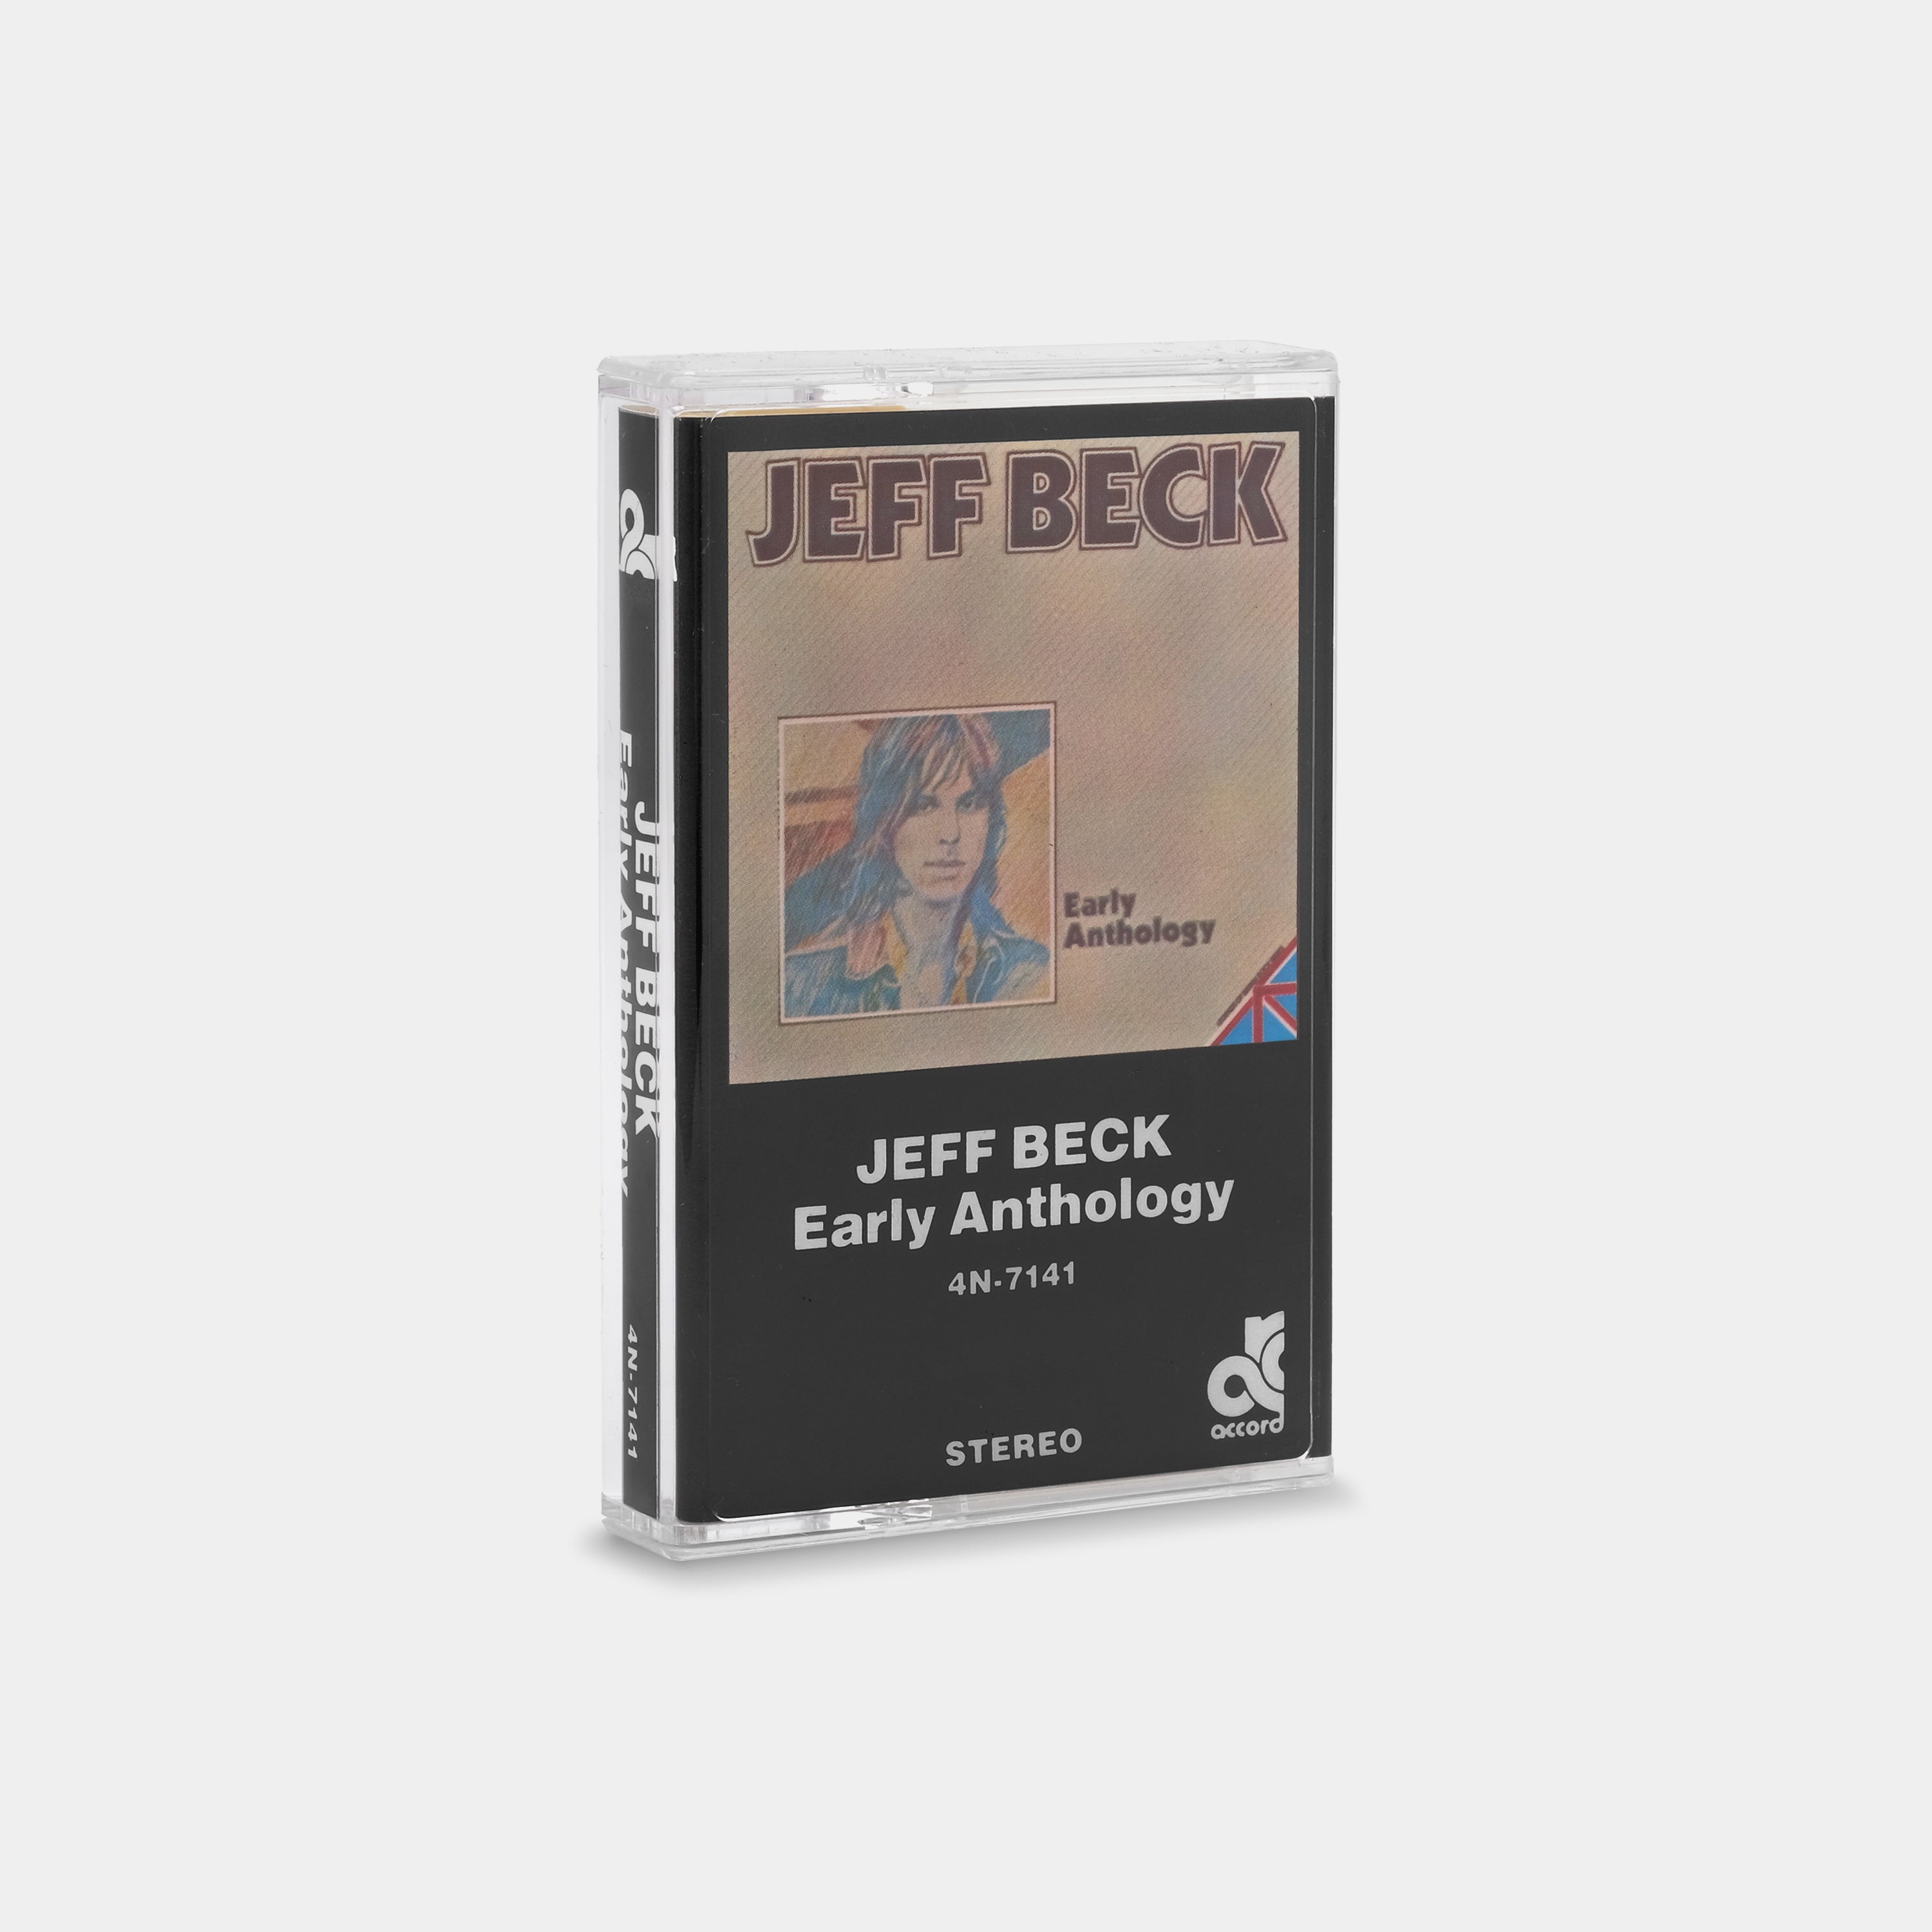 Jeff Beck - Early Anthology Cassette Tape